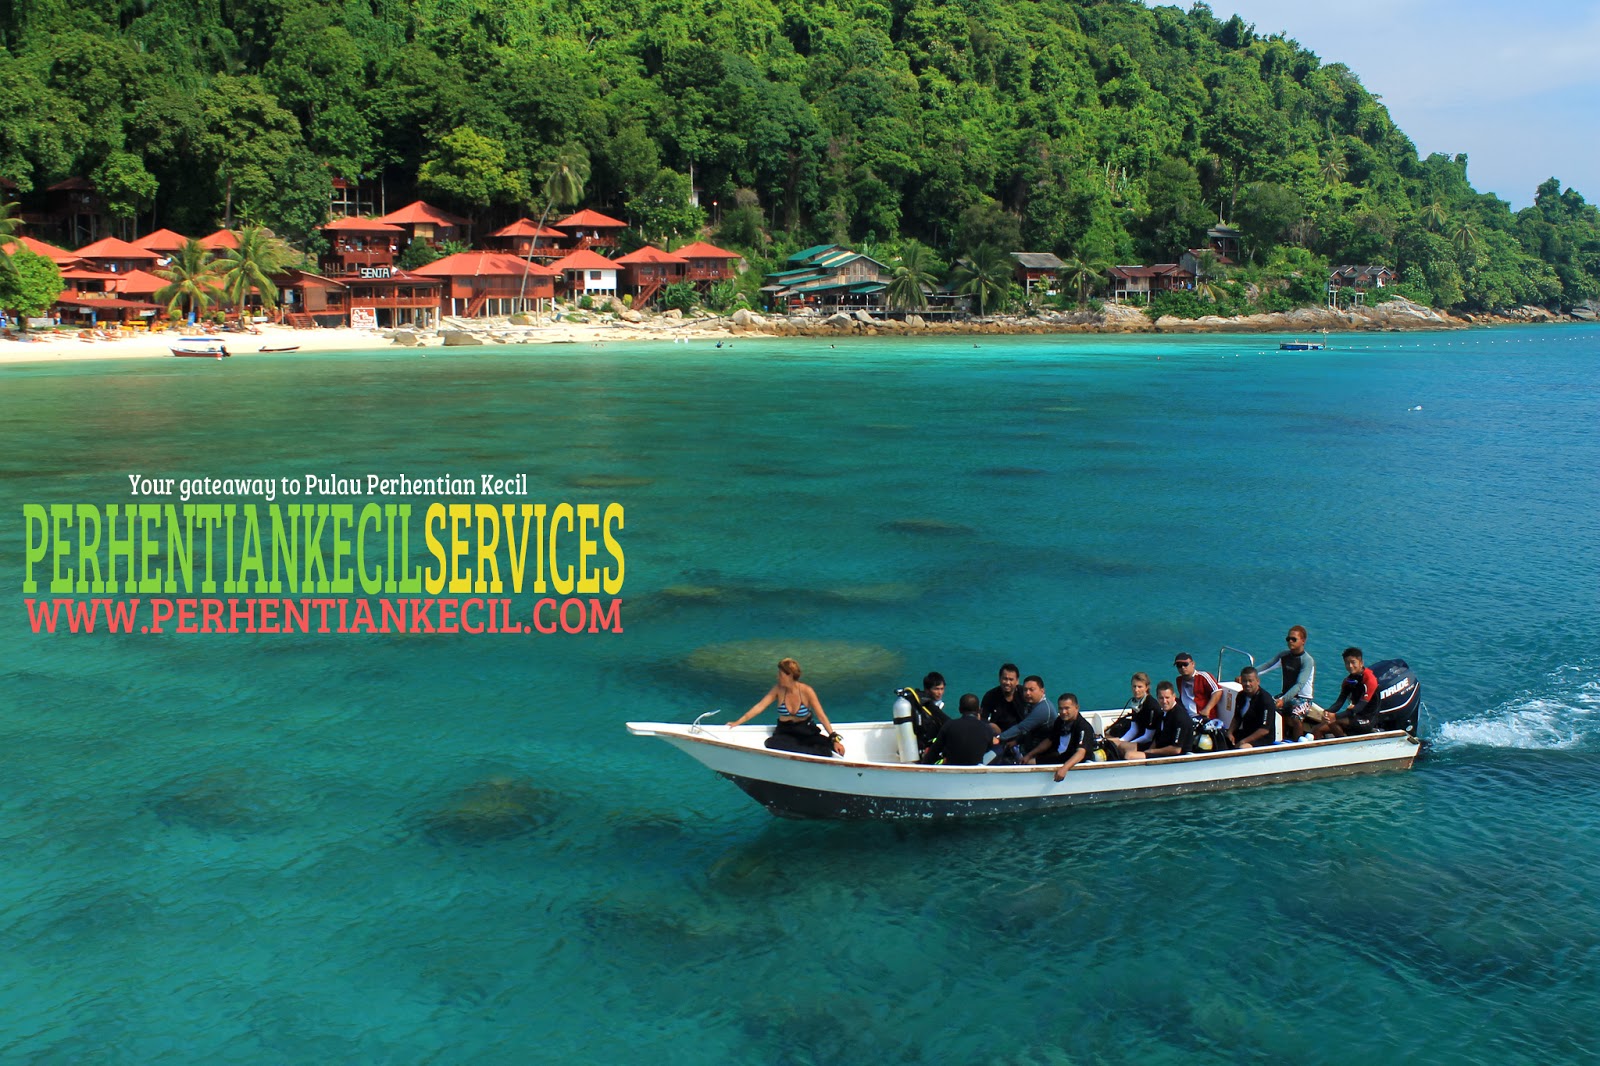 Pulau Perhentian Kecil Package 2016: Attraction in Perhentian Island